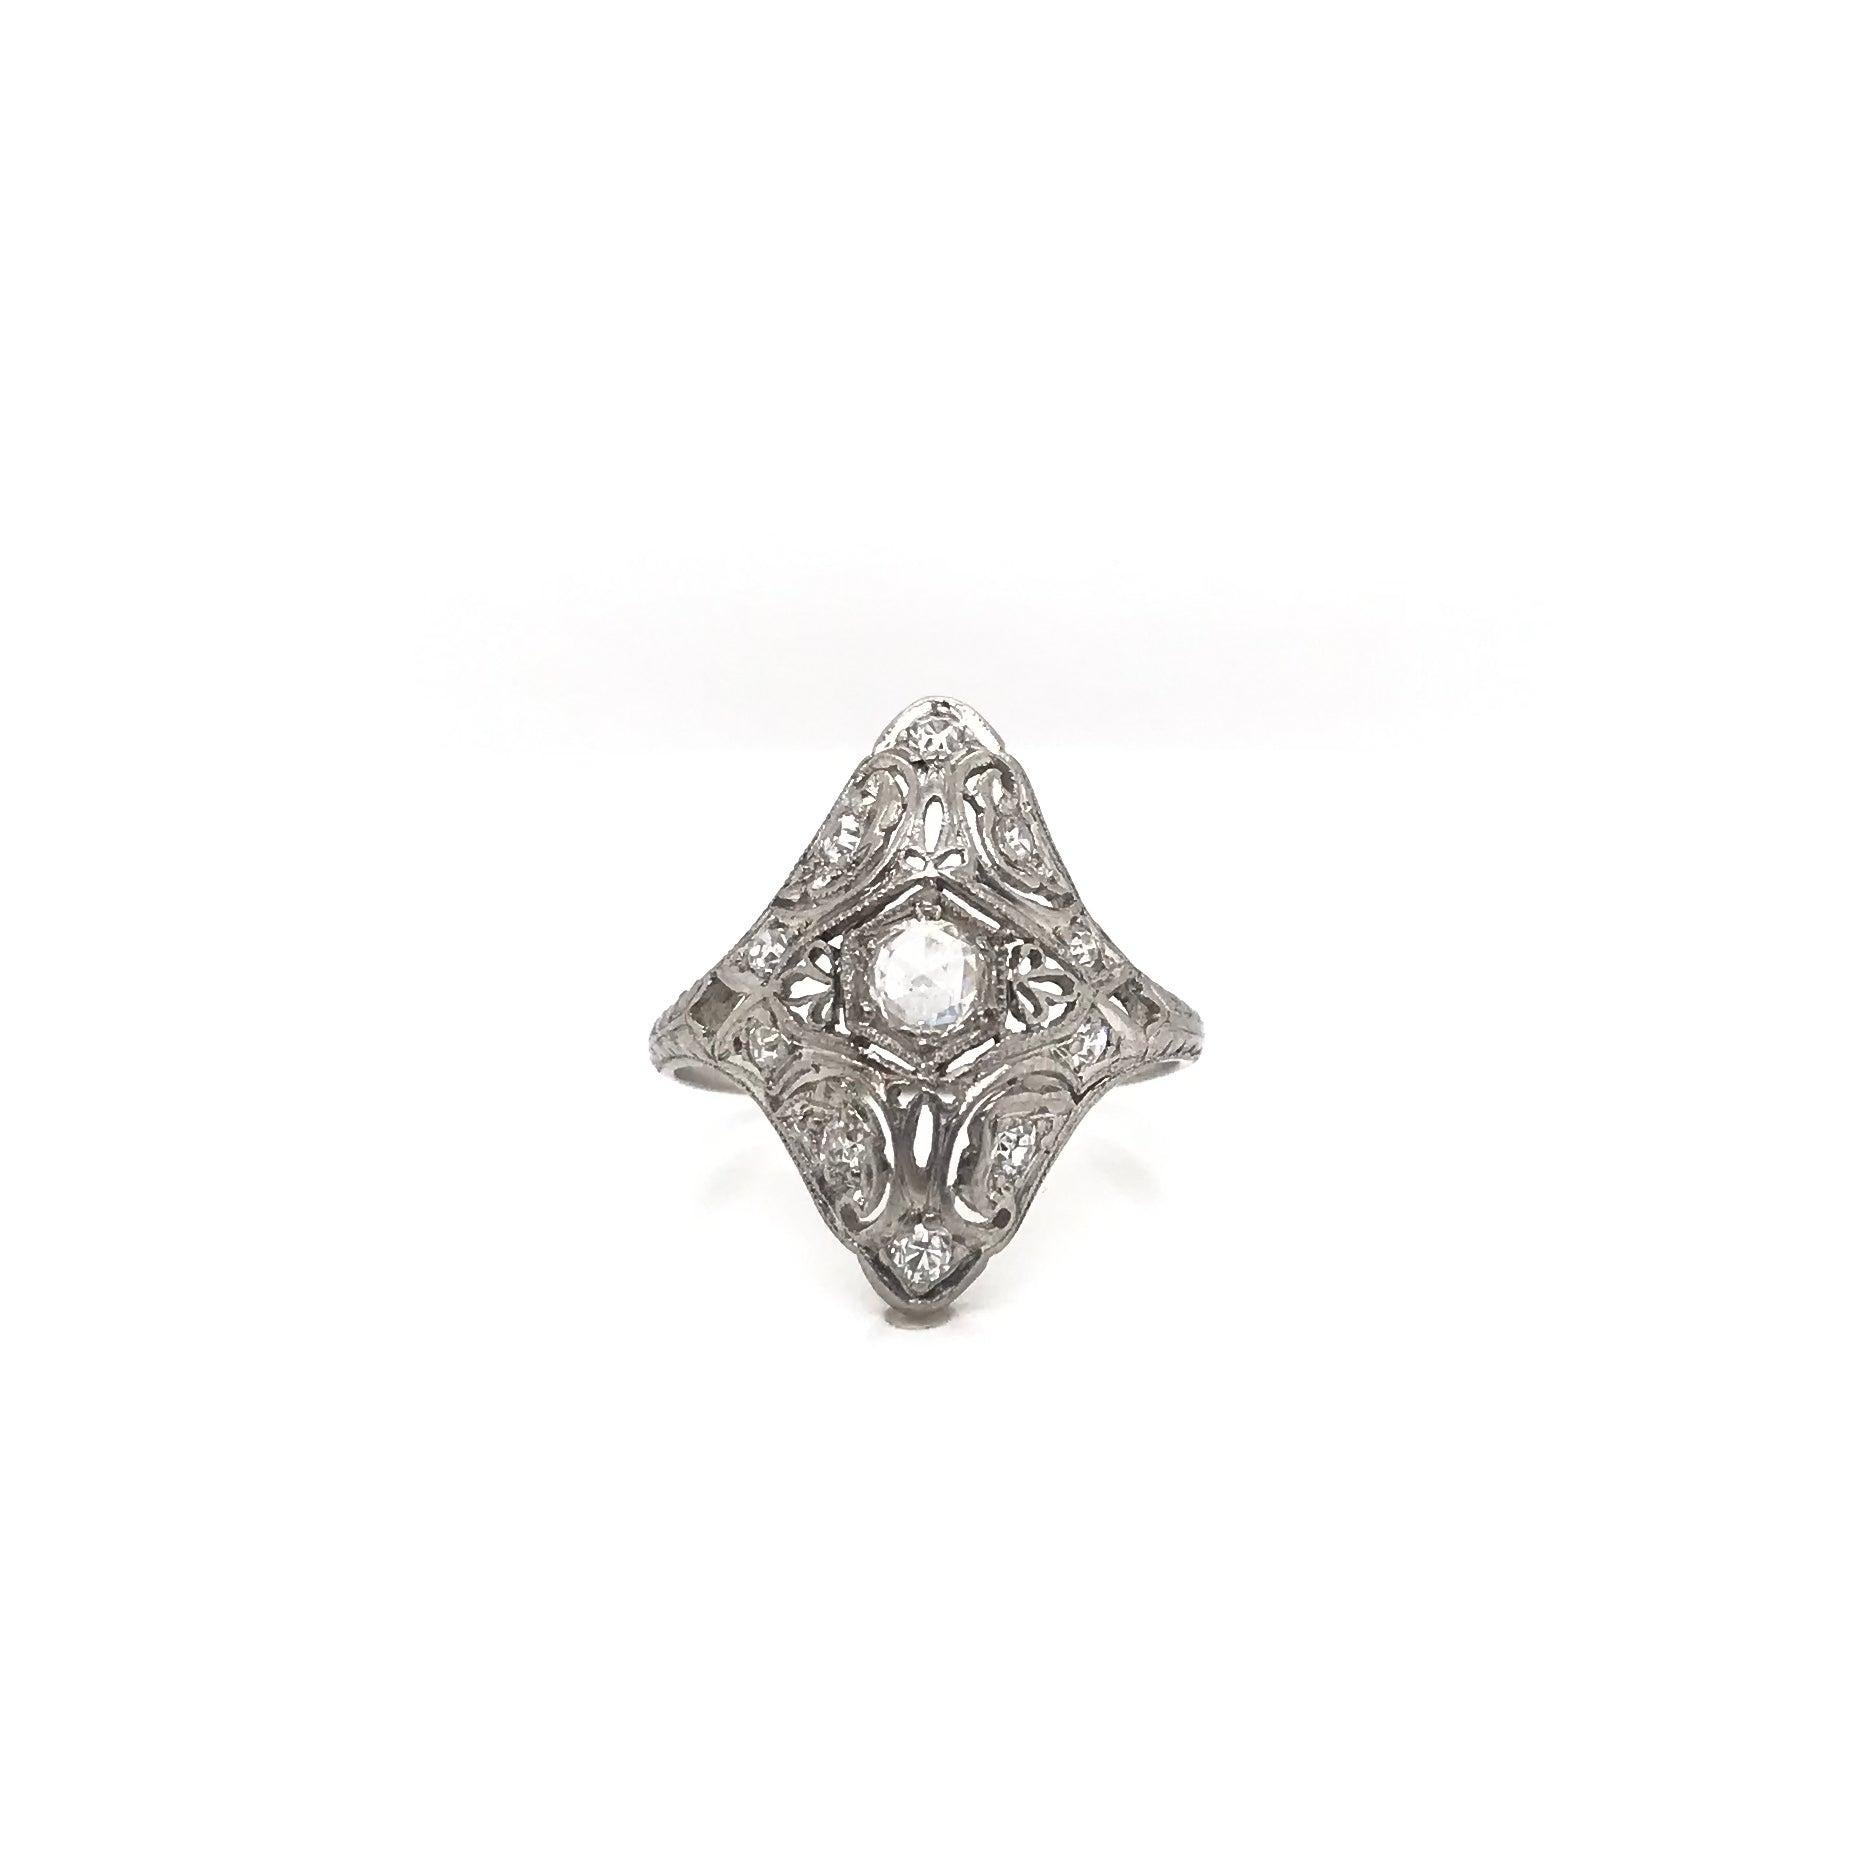 This antique diamond ring was handcrafted sometime during the Edwardian design period (1900-1920). The platinum setting features intricate filigree, precise milgrain accents, and beautiful hand engravings. The center diamond is an antique rose cut